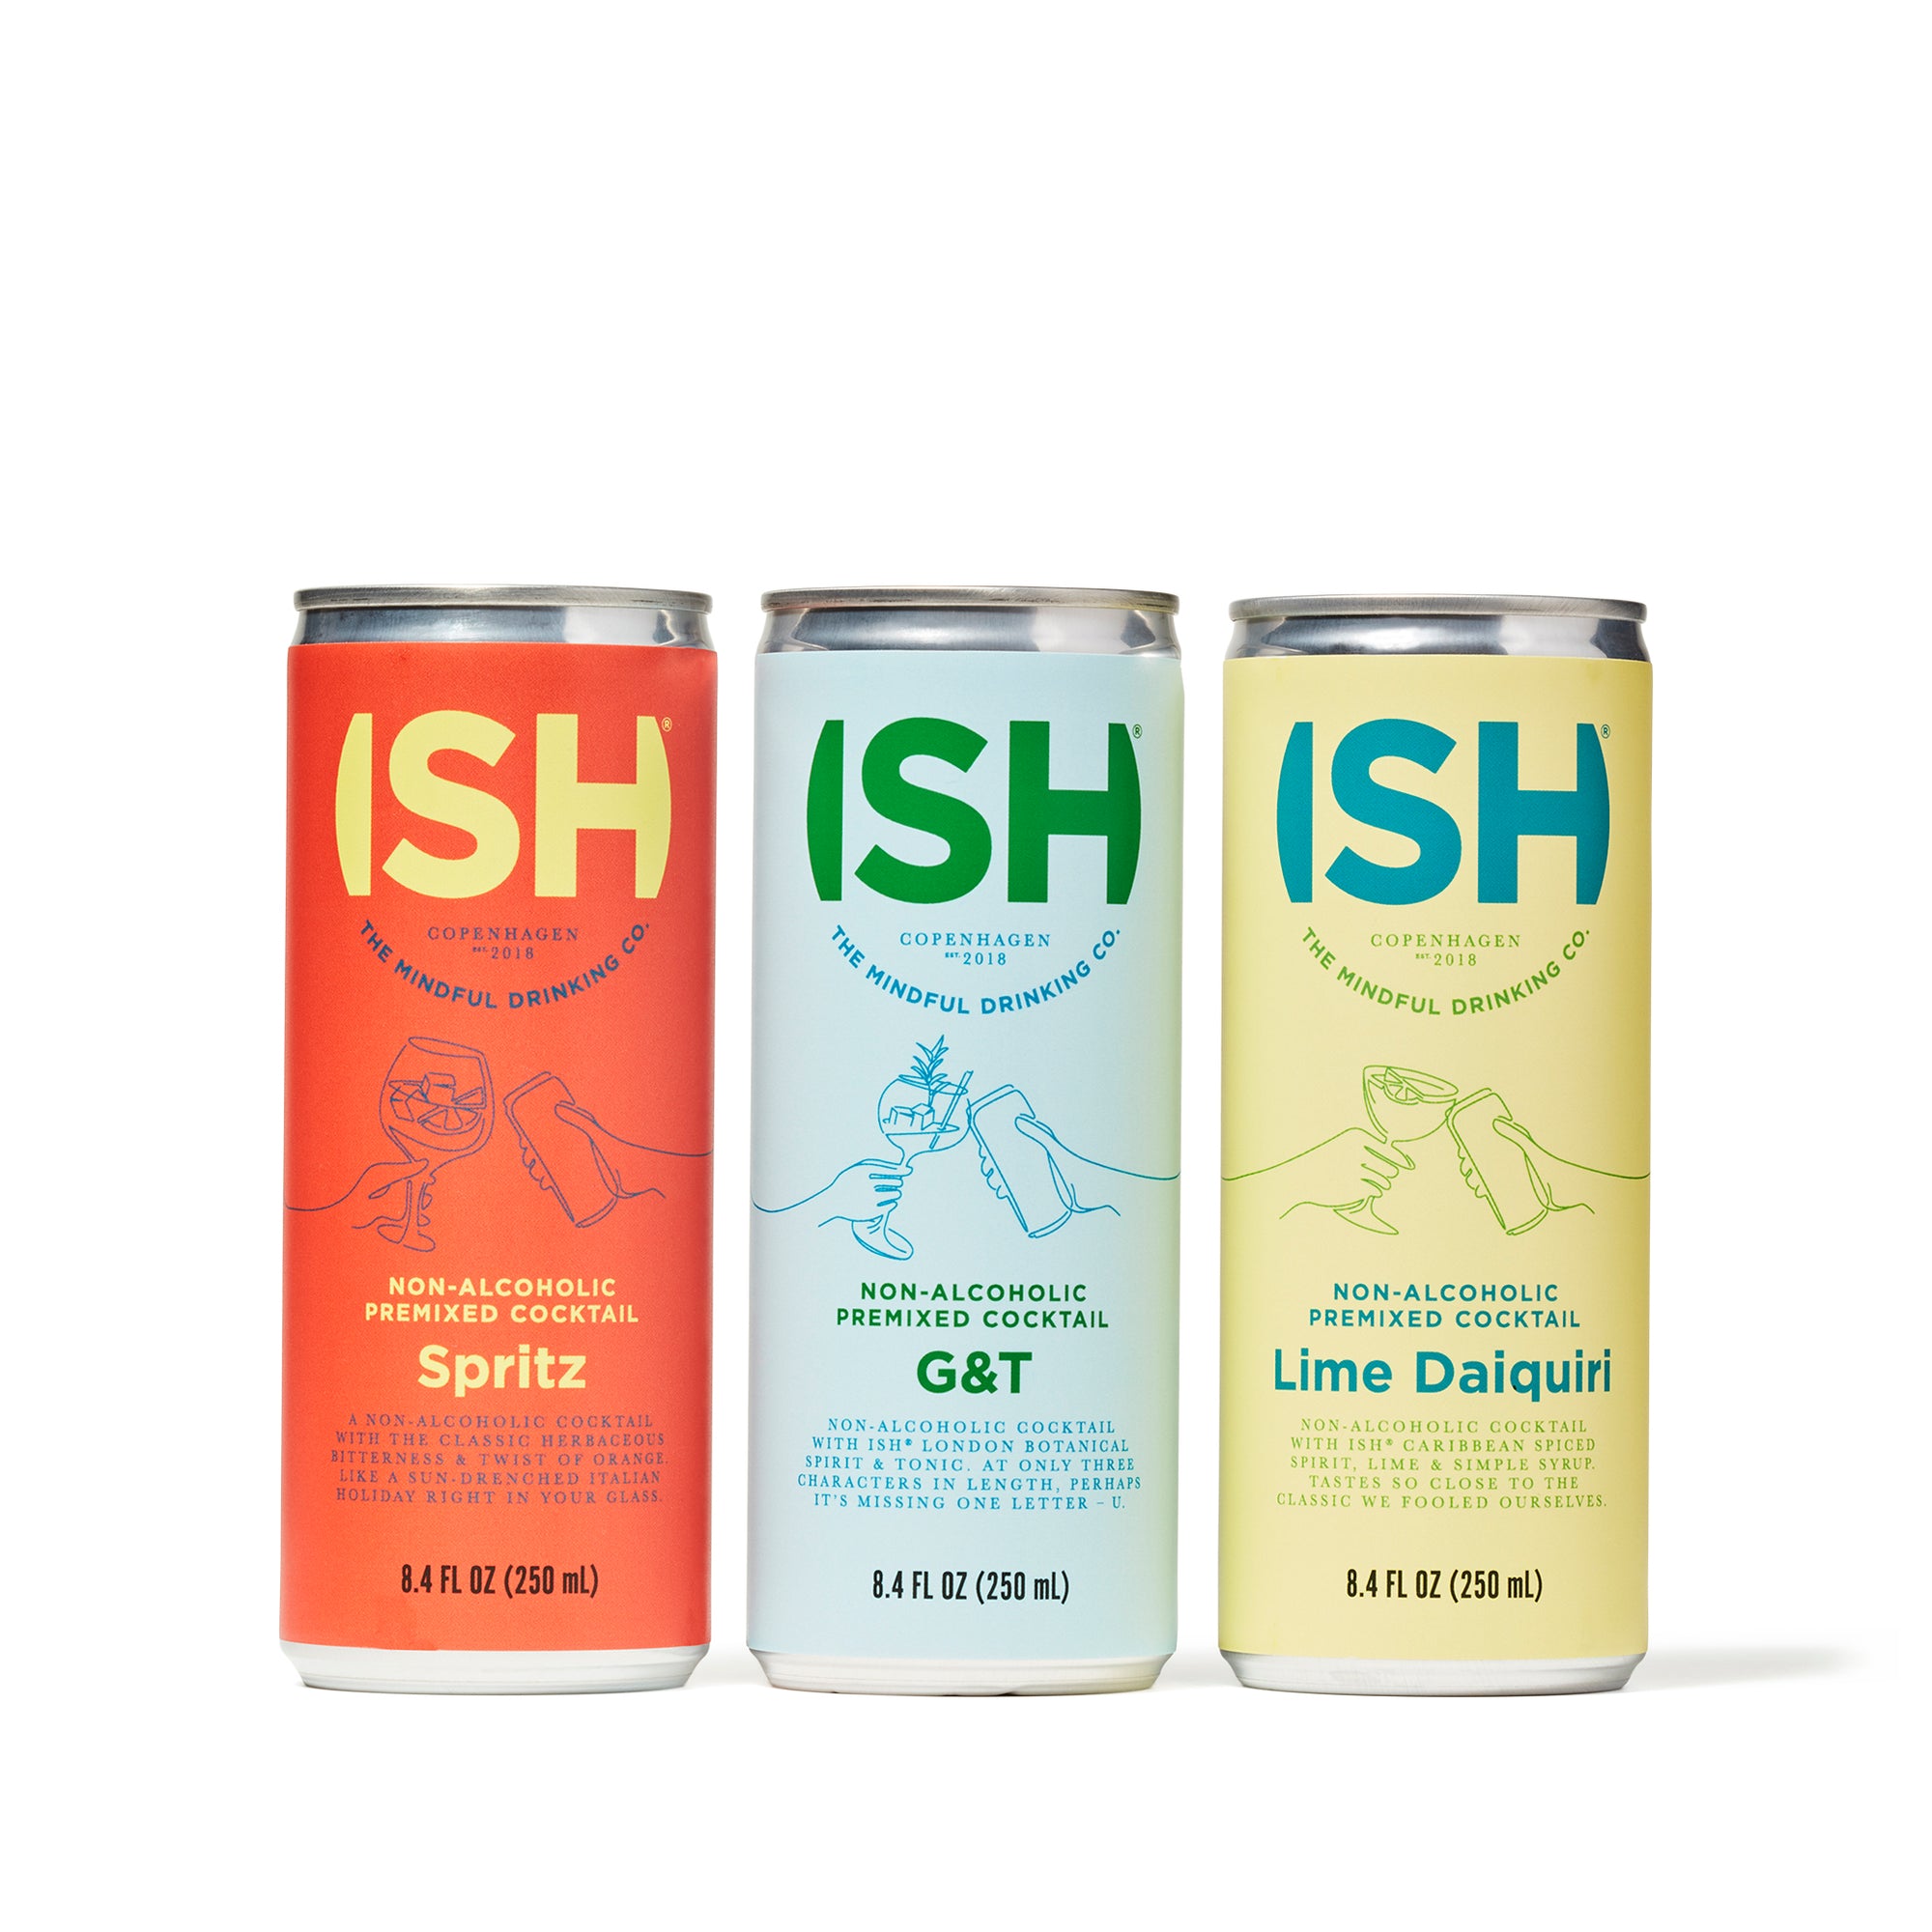 ISH Canned Cocktail Bundle - Boisson — Brooklyn's Non-Alcoholic Spirits, Beer, Wine, and Home Bar Shop in Cobble Hill